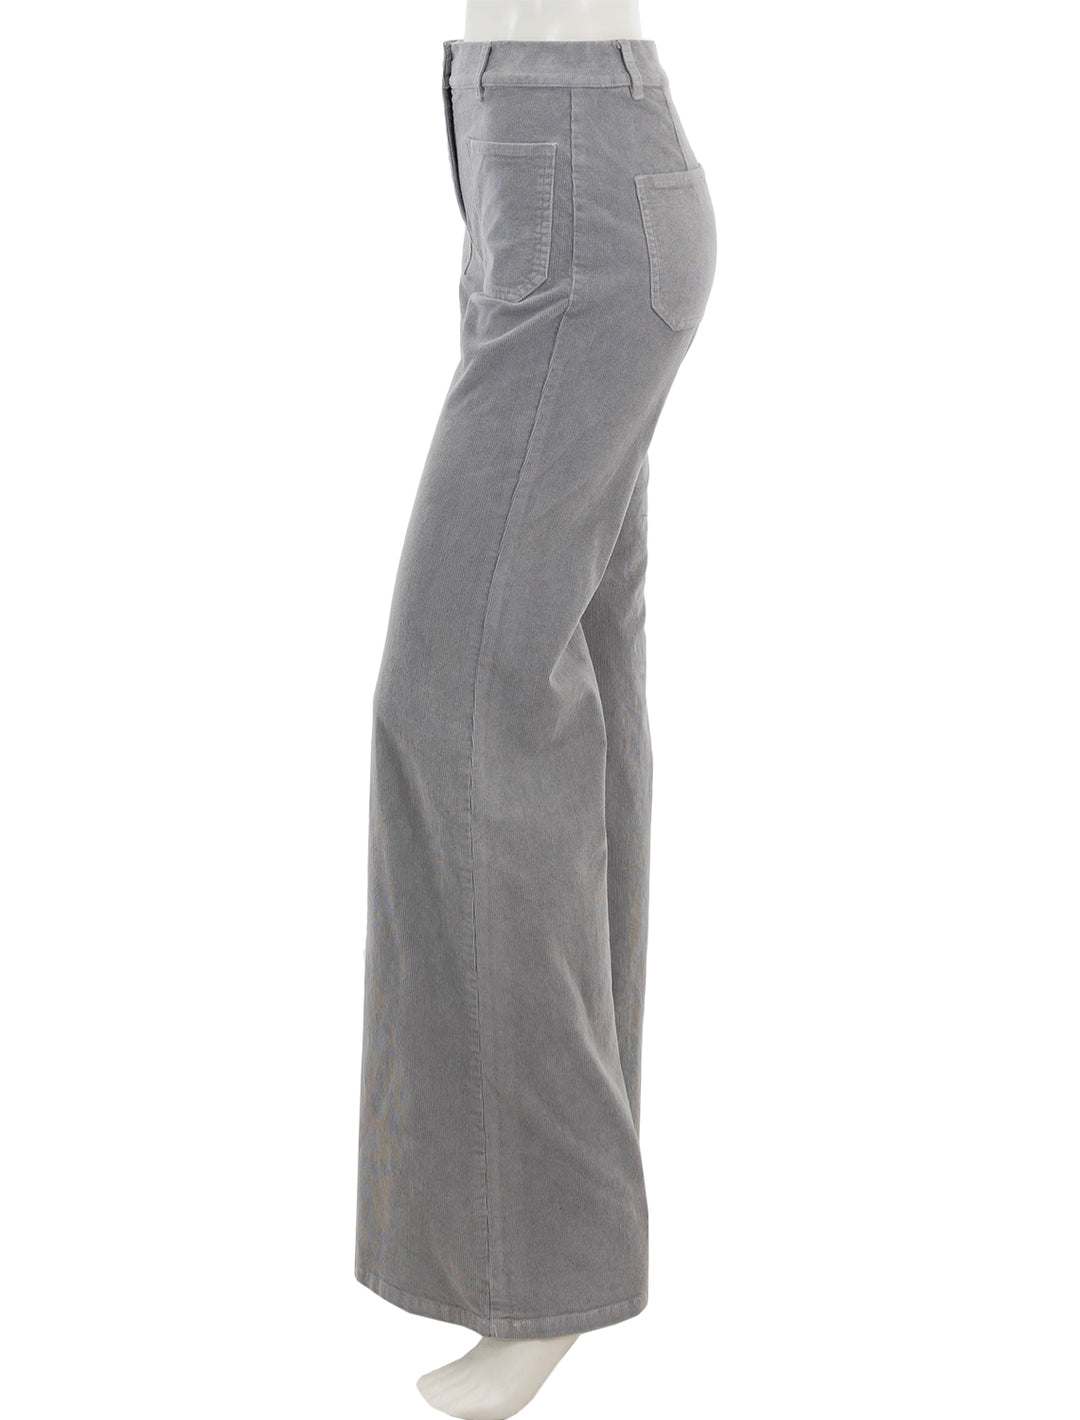 Side view of Nili Lotan's florence pant in grey.